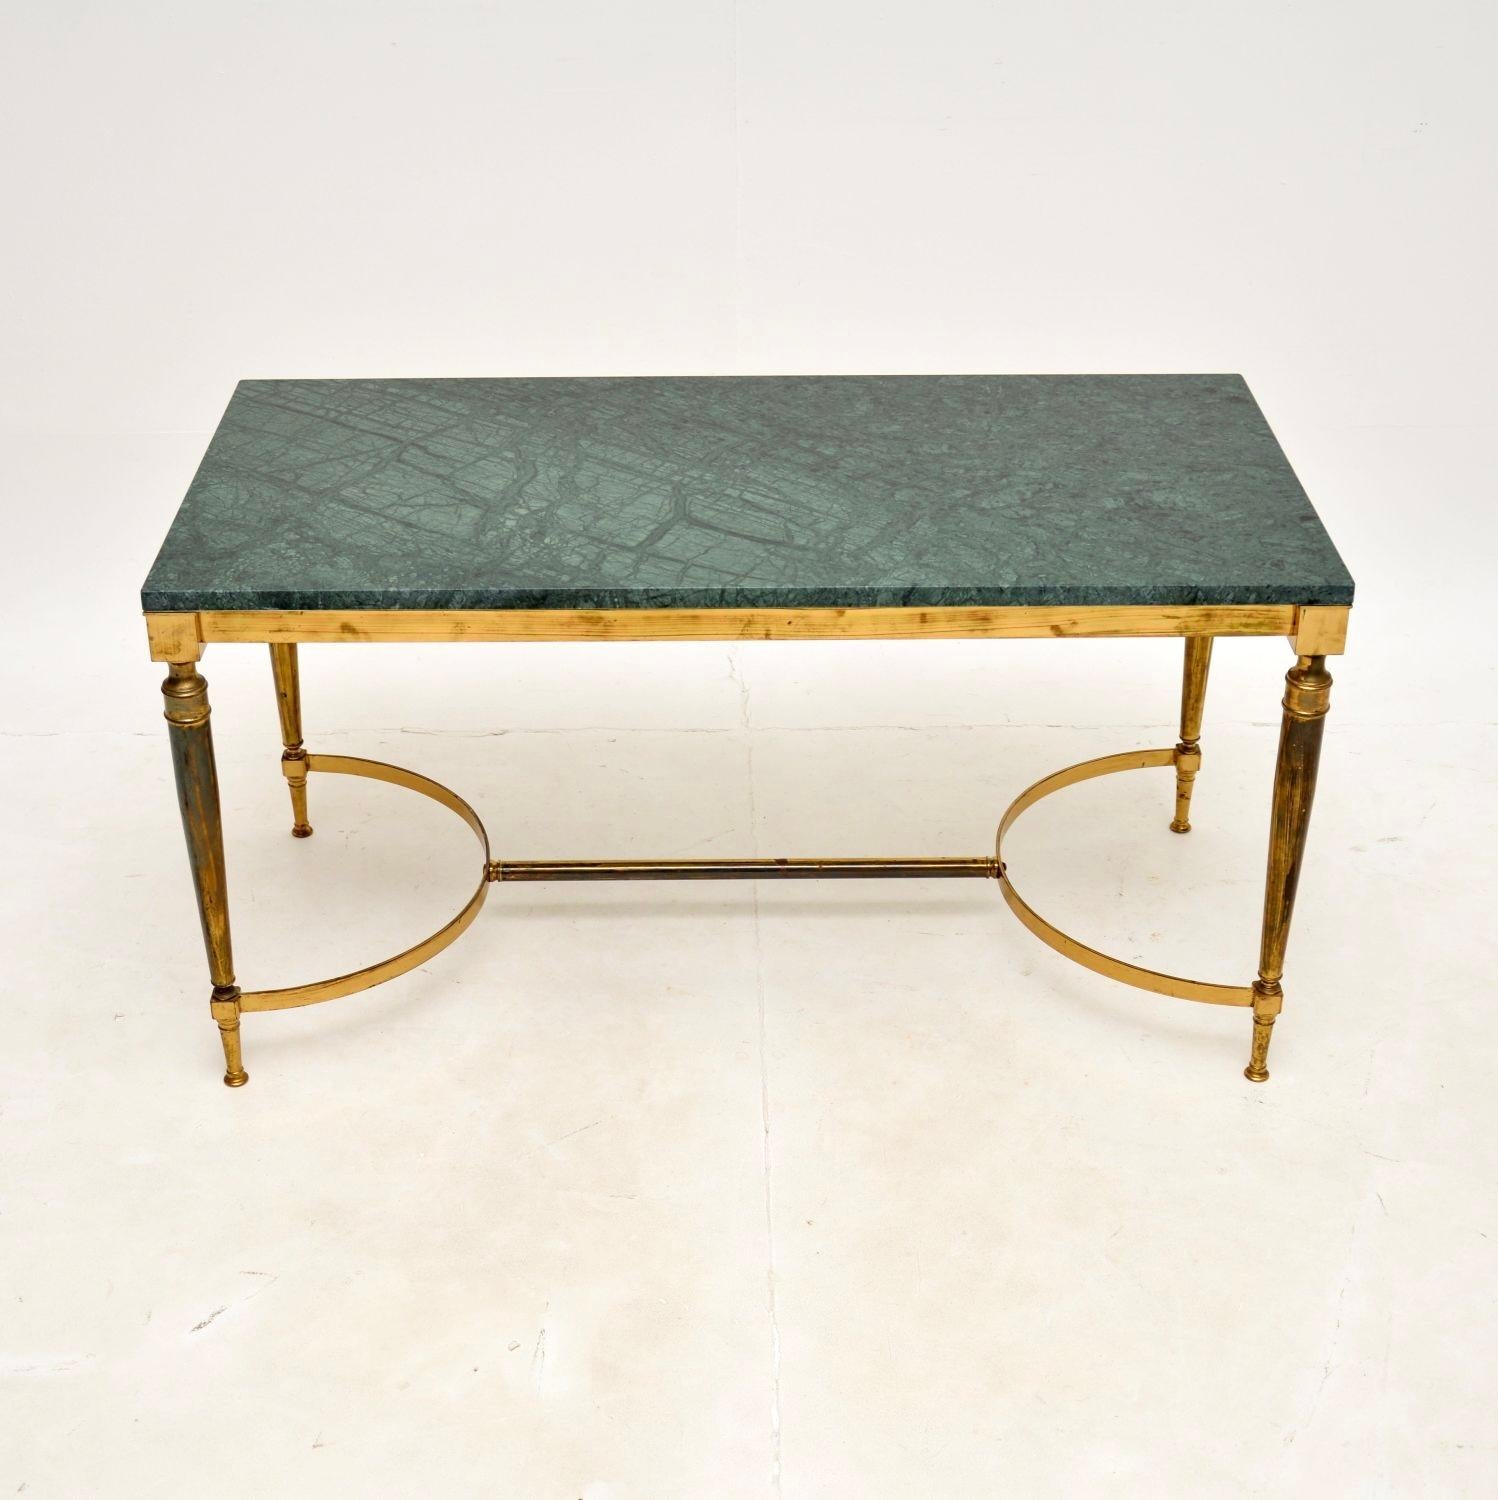 A stylish and very well made vintage French brass and marble coffee table. This was made in France, it dates from around the 1970’s.

The quality is fantastic, the solid brass frame is very well made with a wishbone stretcher between the legs for